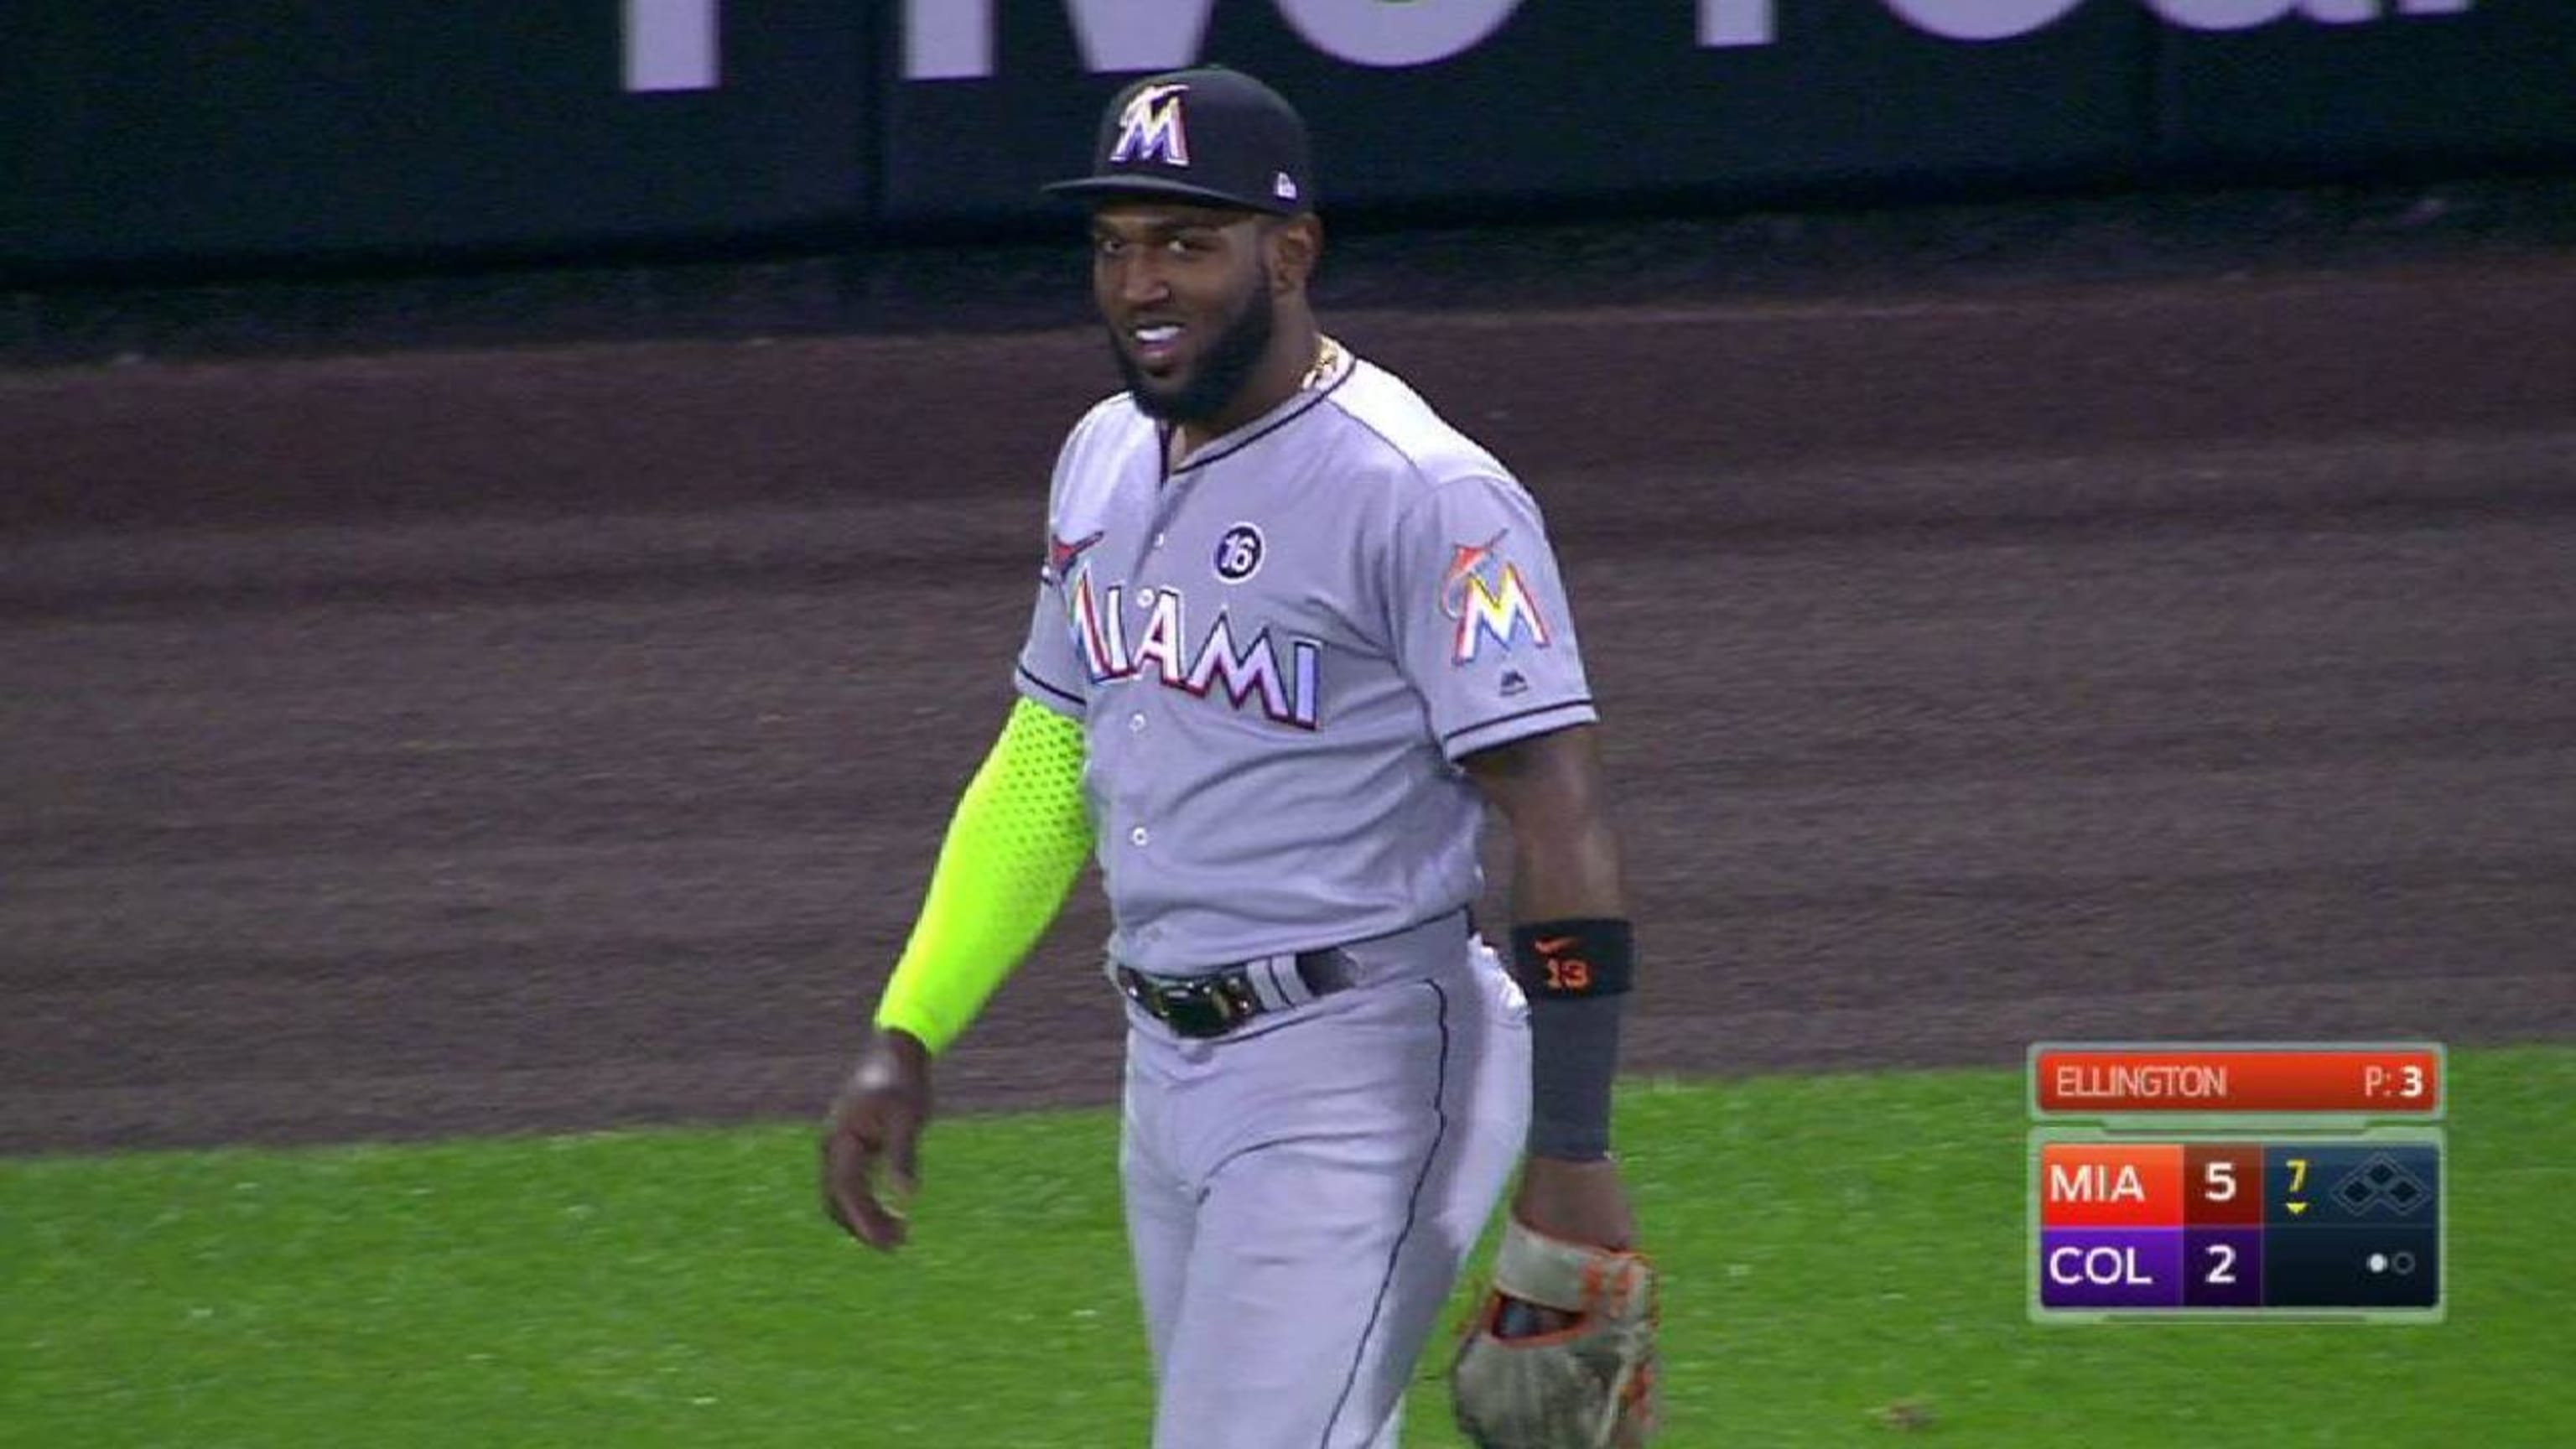 Miami Marlins outfielder Marcell Ozuna (13) during game against